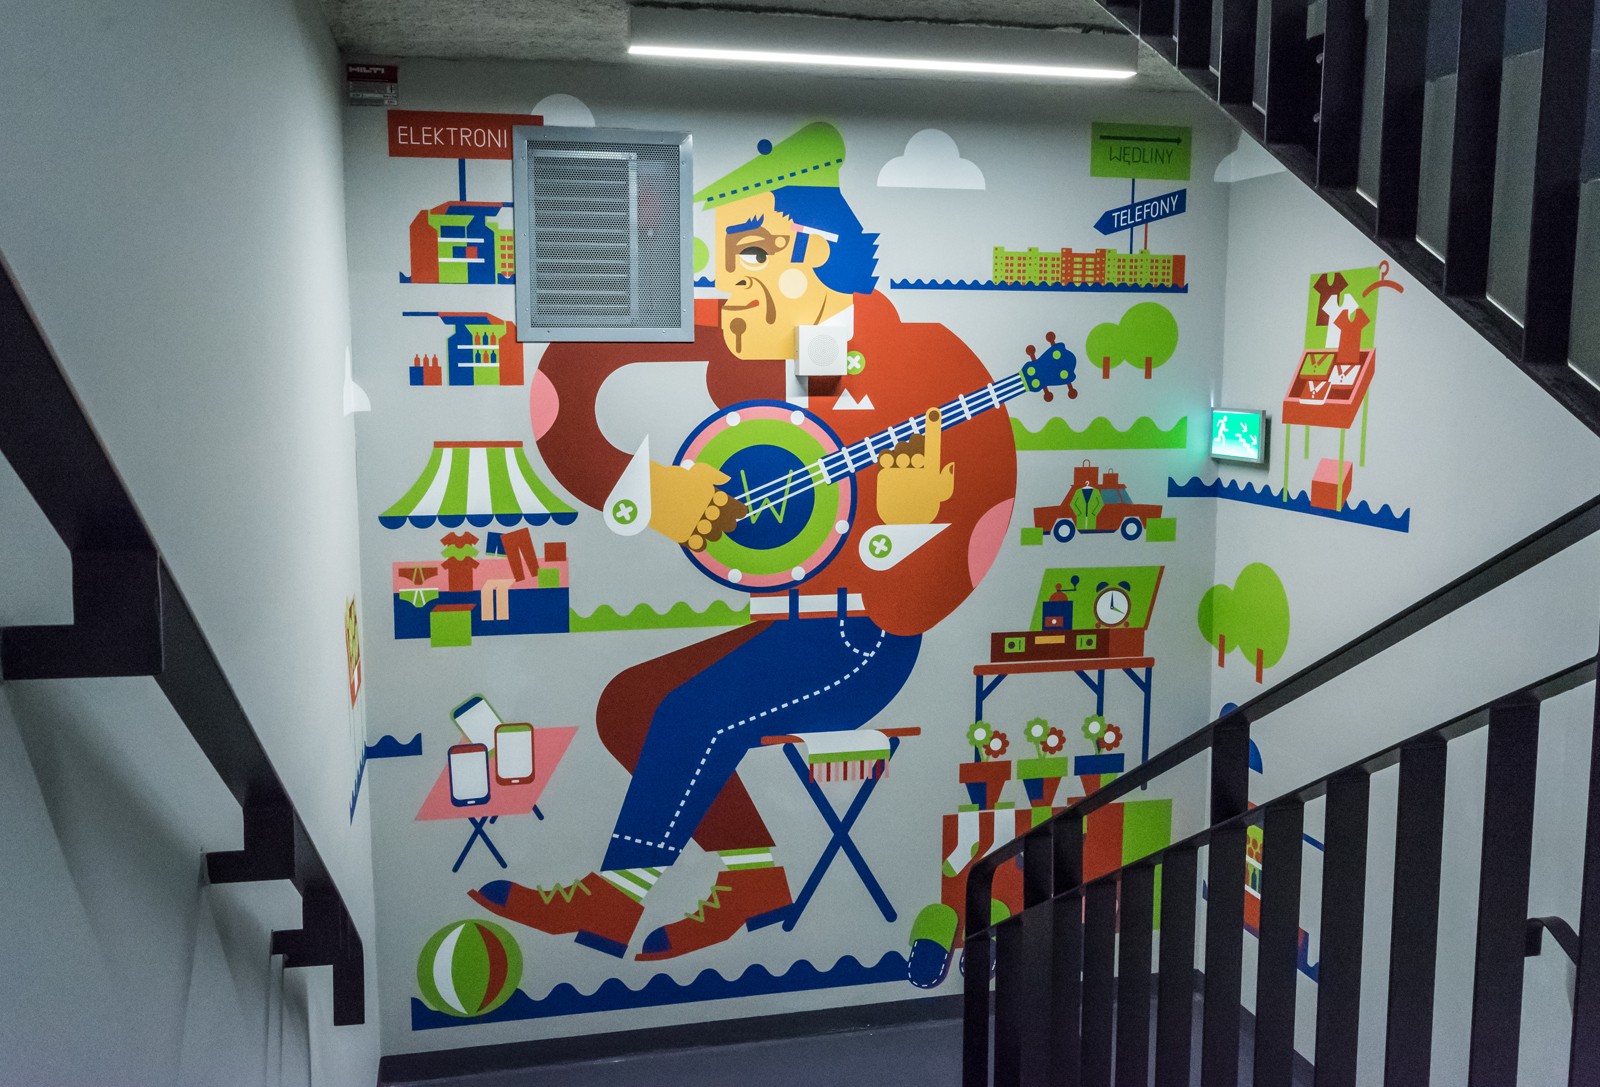 The interior of Q22 building with a mural painted for Deloitte | Malowanie na zlecenie Deloitte | Portfolio